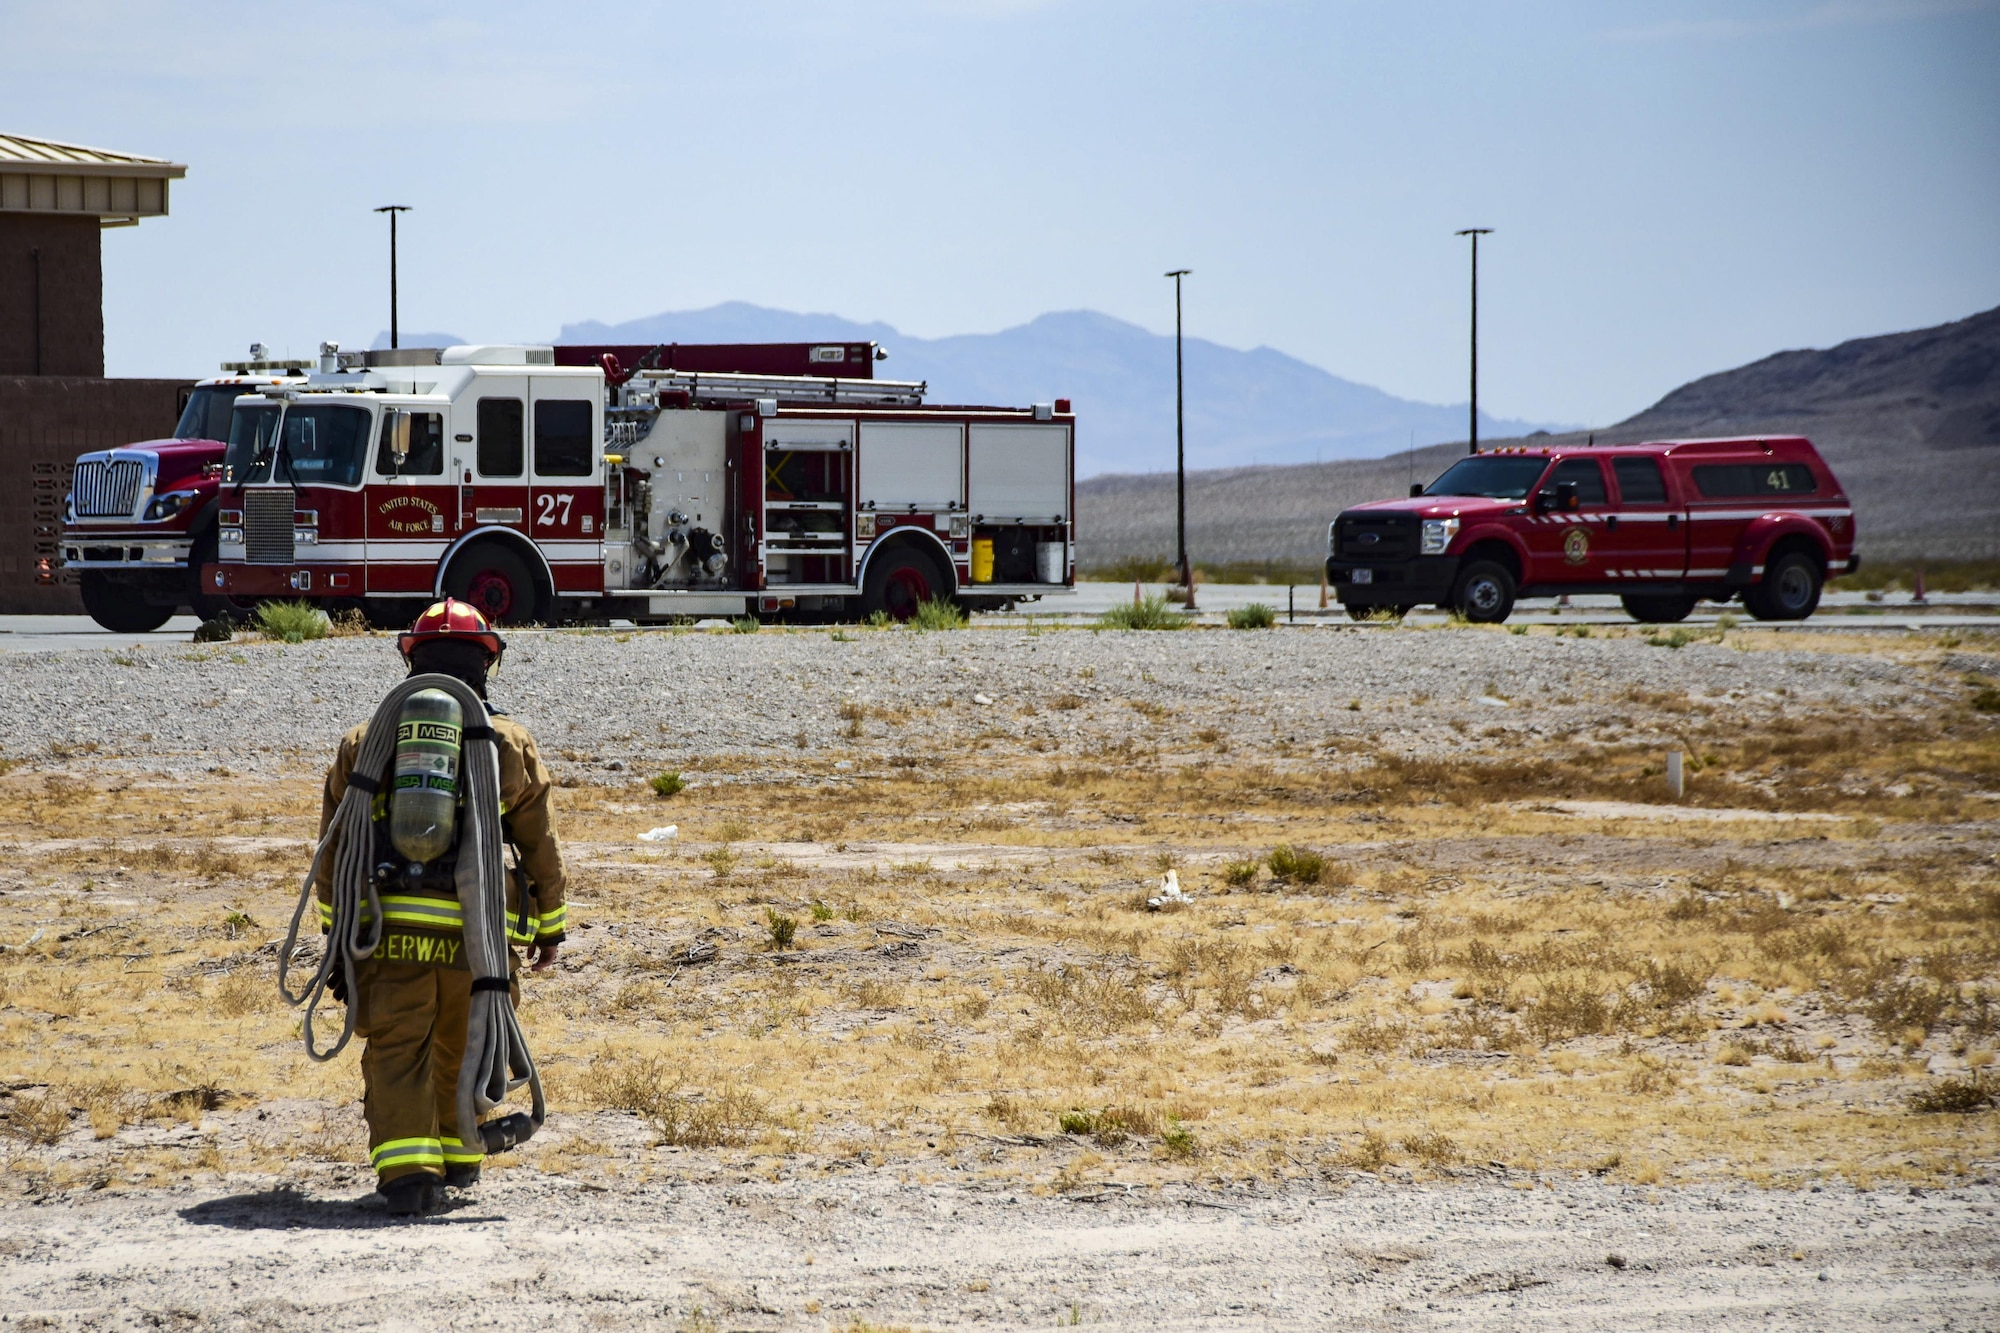 Staff Sgt. Blaine Erway, 99th Civil Engineer Squadron firefighter crew chief, walks back to fire engine 27 at Nellis Air Force Base, Nev., July 18, 2017. Erway and his team just completed climbing 10 stories to the top of the air traffic control tower for an emergency response readiness training exercise. (U.S. Air Force photo by Airman 1st Class Andrew D. Sarver/Released)